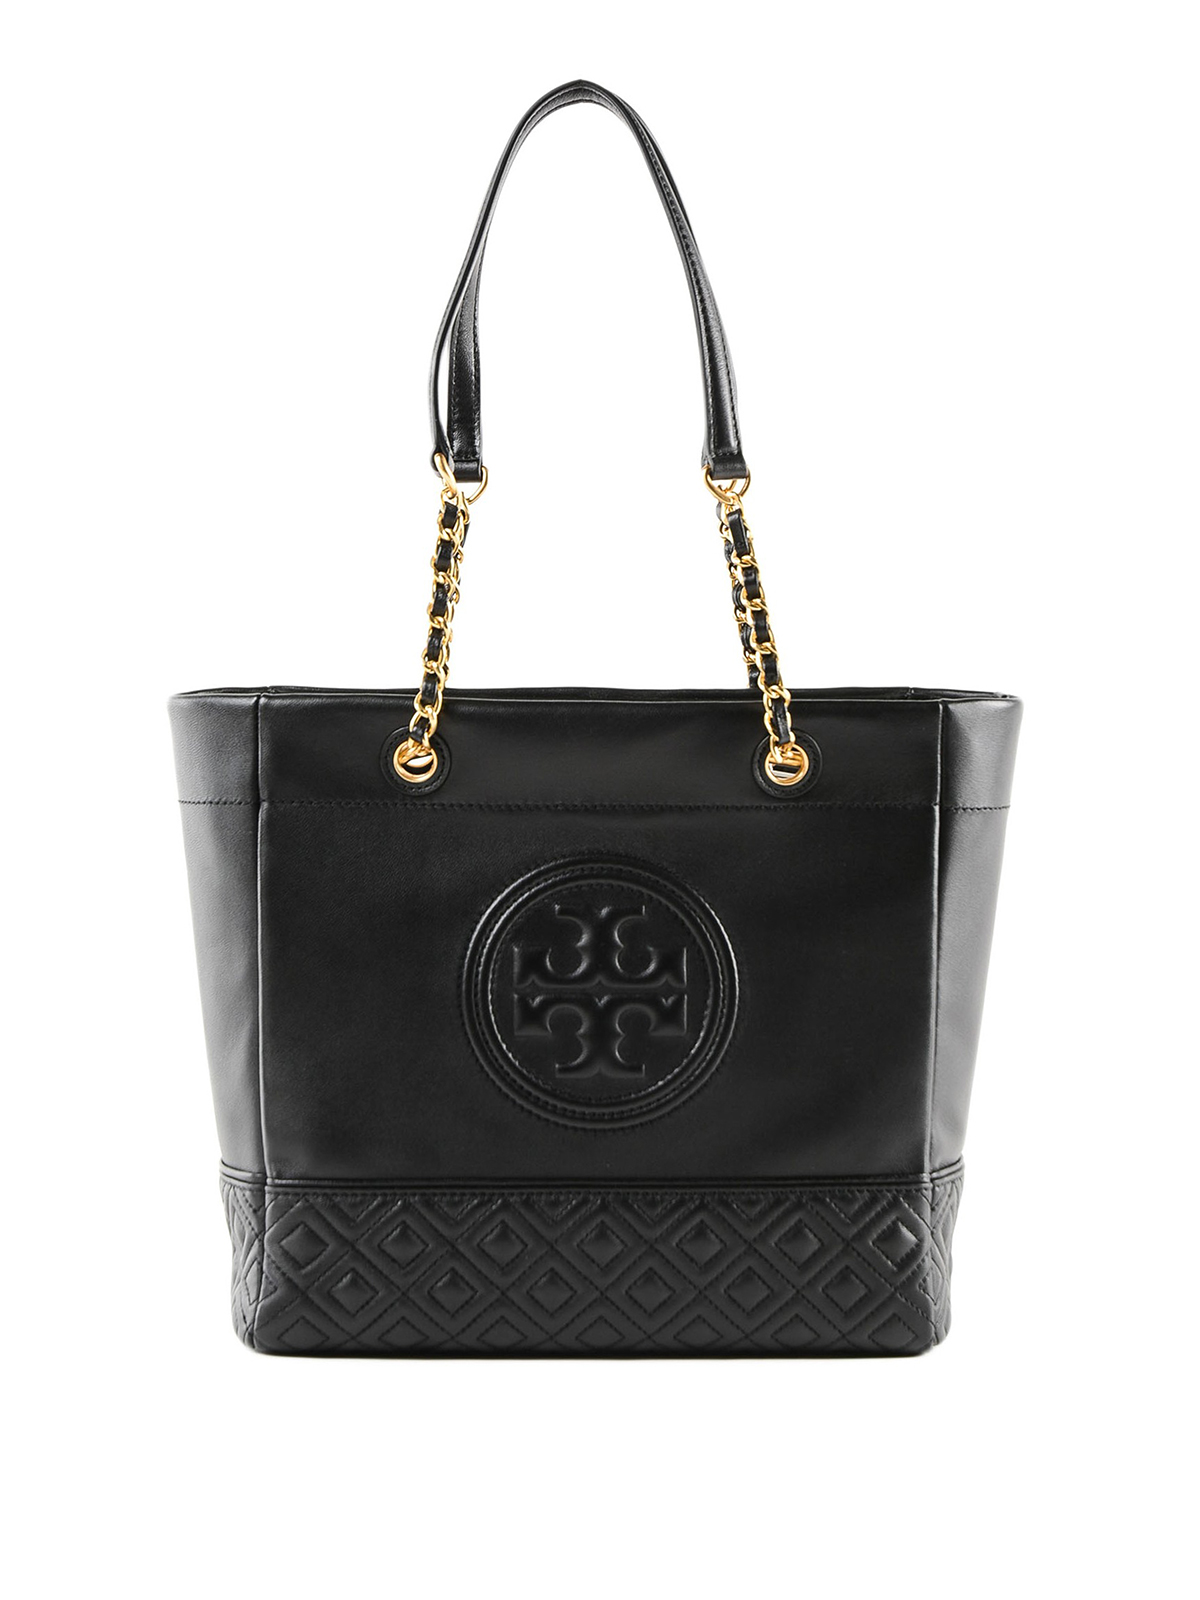 Totes bags Tory Burch - Fleming golden chain leather tote bag - 52983001